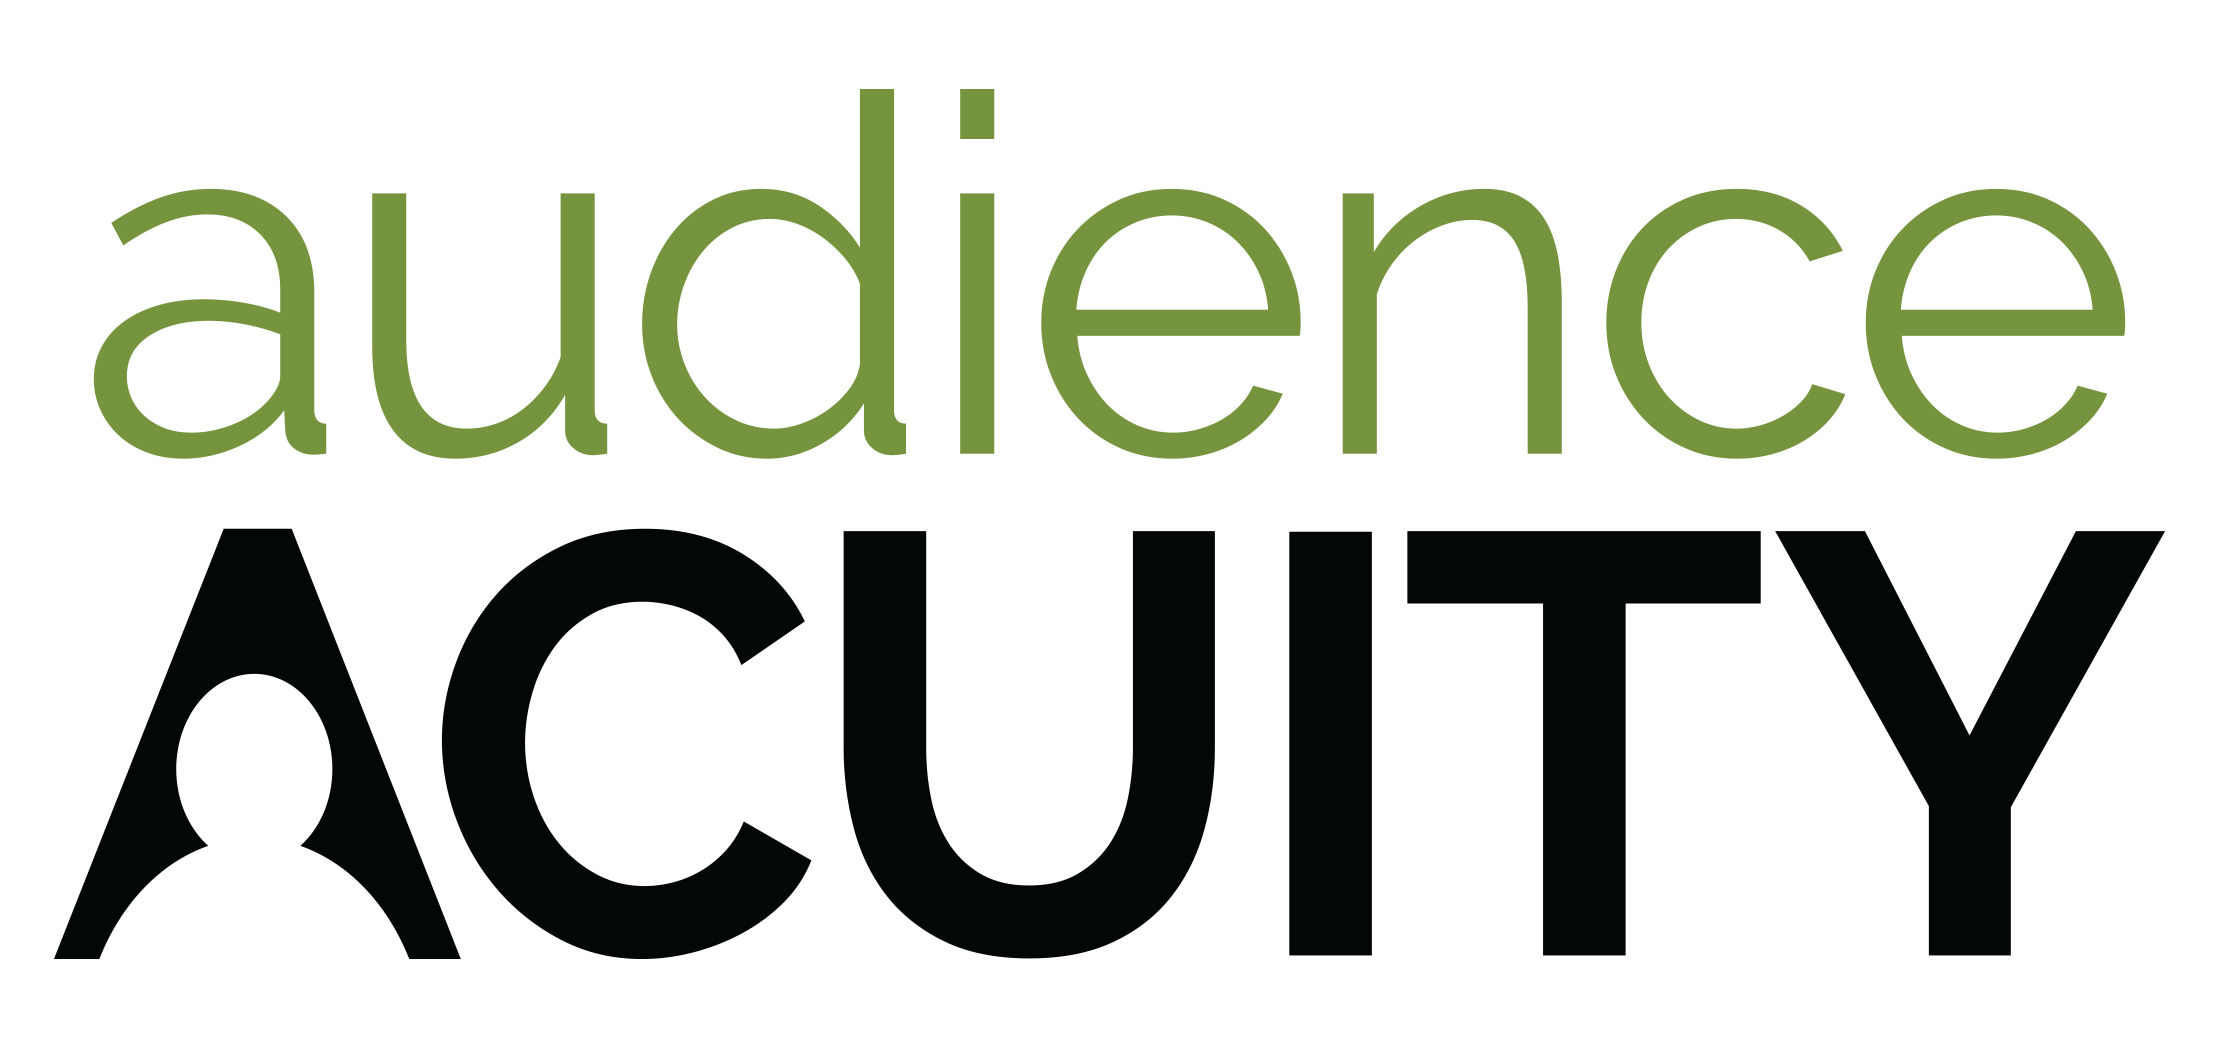 Audience Acuity is a leading consumer identity management firm that enables clients to identify and contextually interact with audiences across all consumer engagement channels, in a privacy-compliant manner, at scale. The firm's proprietary data science structure is individually oriented, deterministically matched, and 3rd party validated to ensure accuracy in addressing today’s identity-related data challenges. Audience Acuity supports leading brands, marketing and advertising technology firms and management consulting with post-cookie identity resolution, 1st party data collaboration, audience activation, analytics and data enhancement with on premise installation or via its data-as-a-service platform.